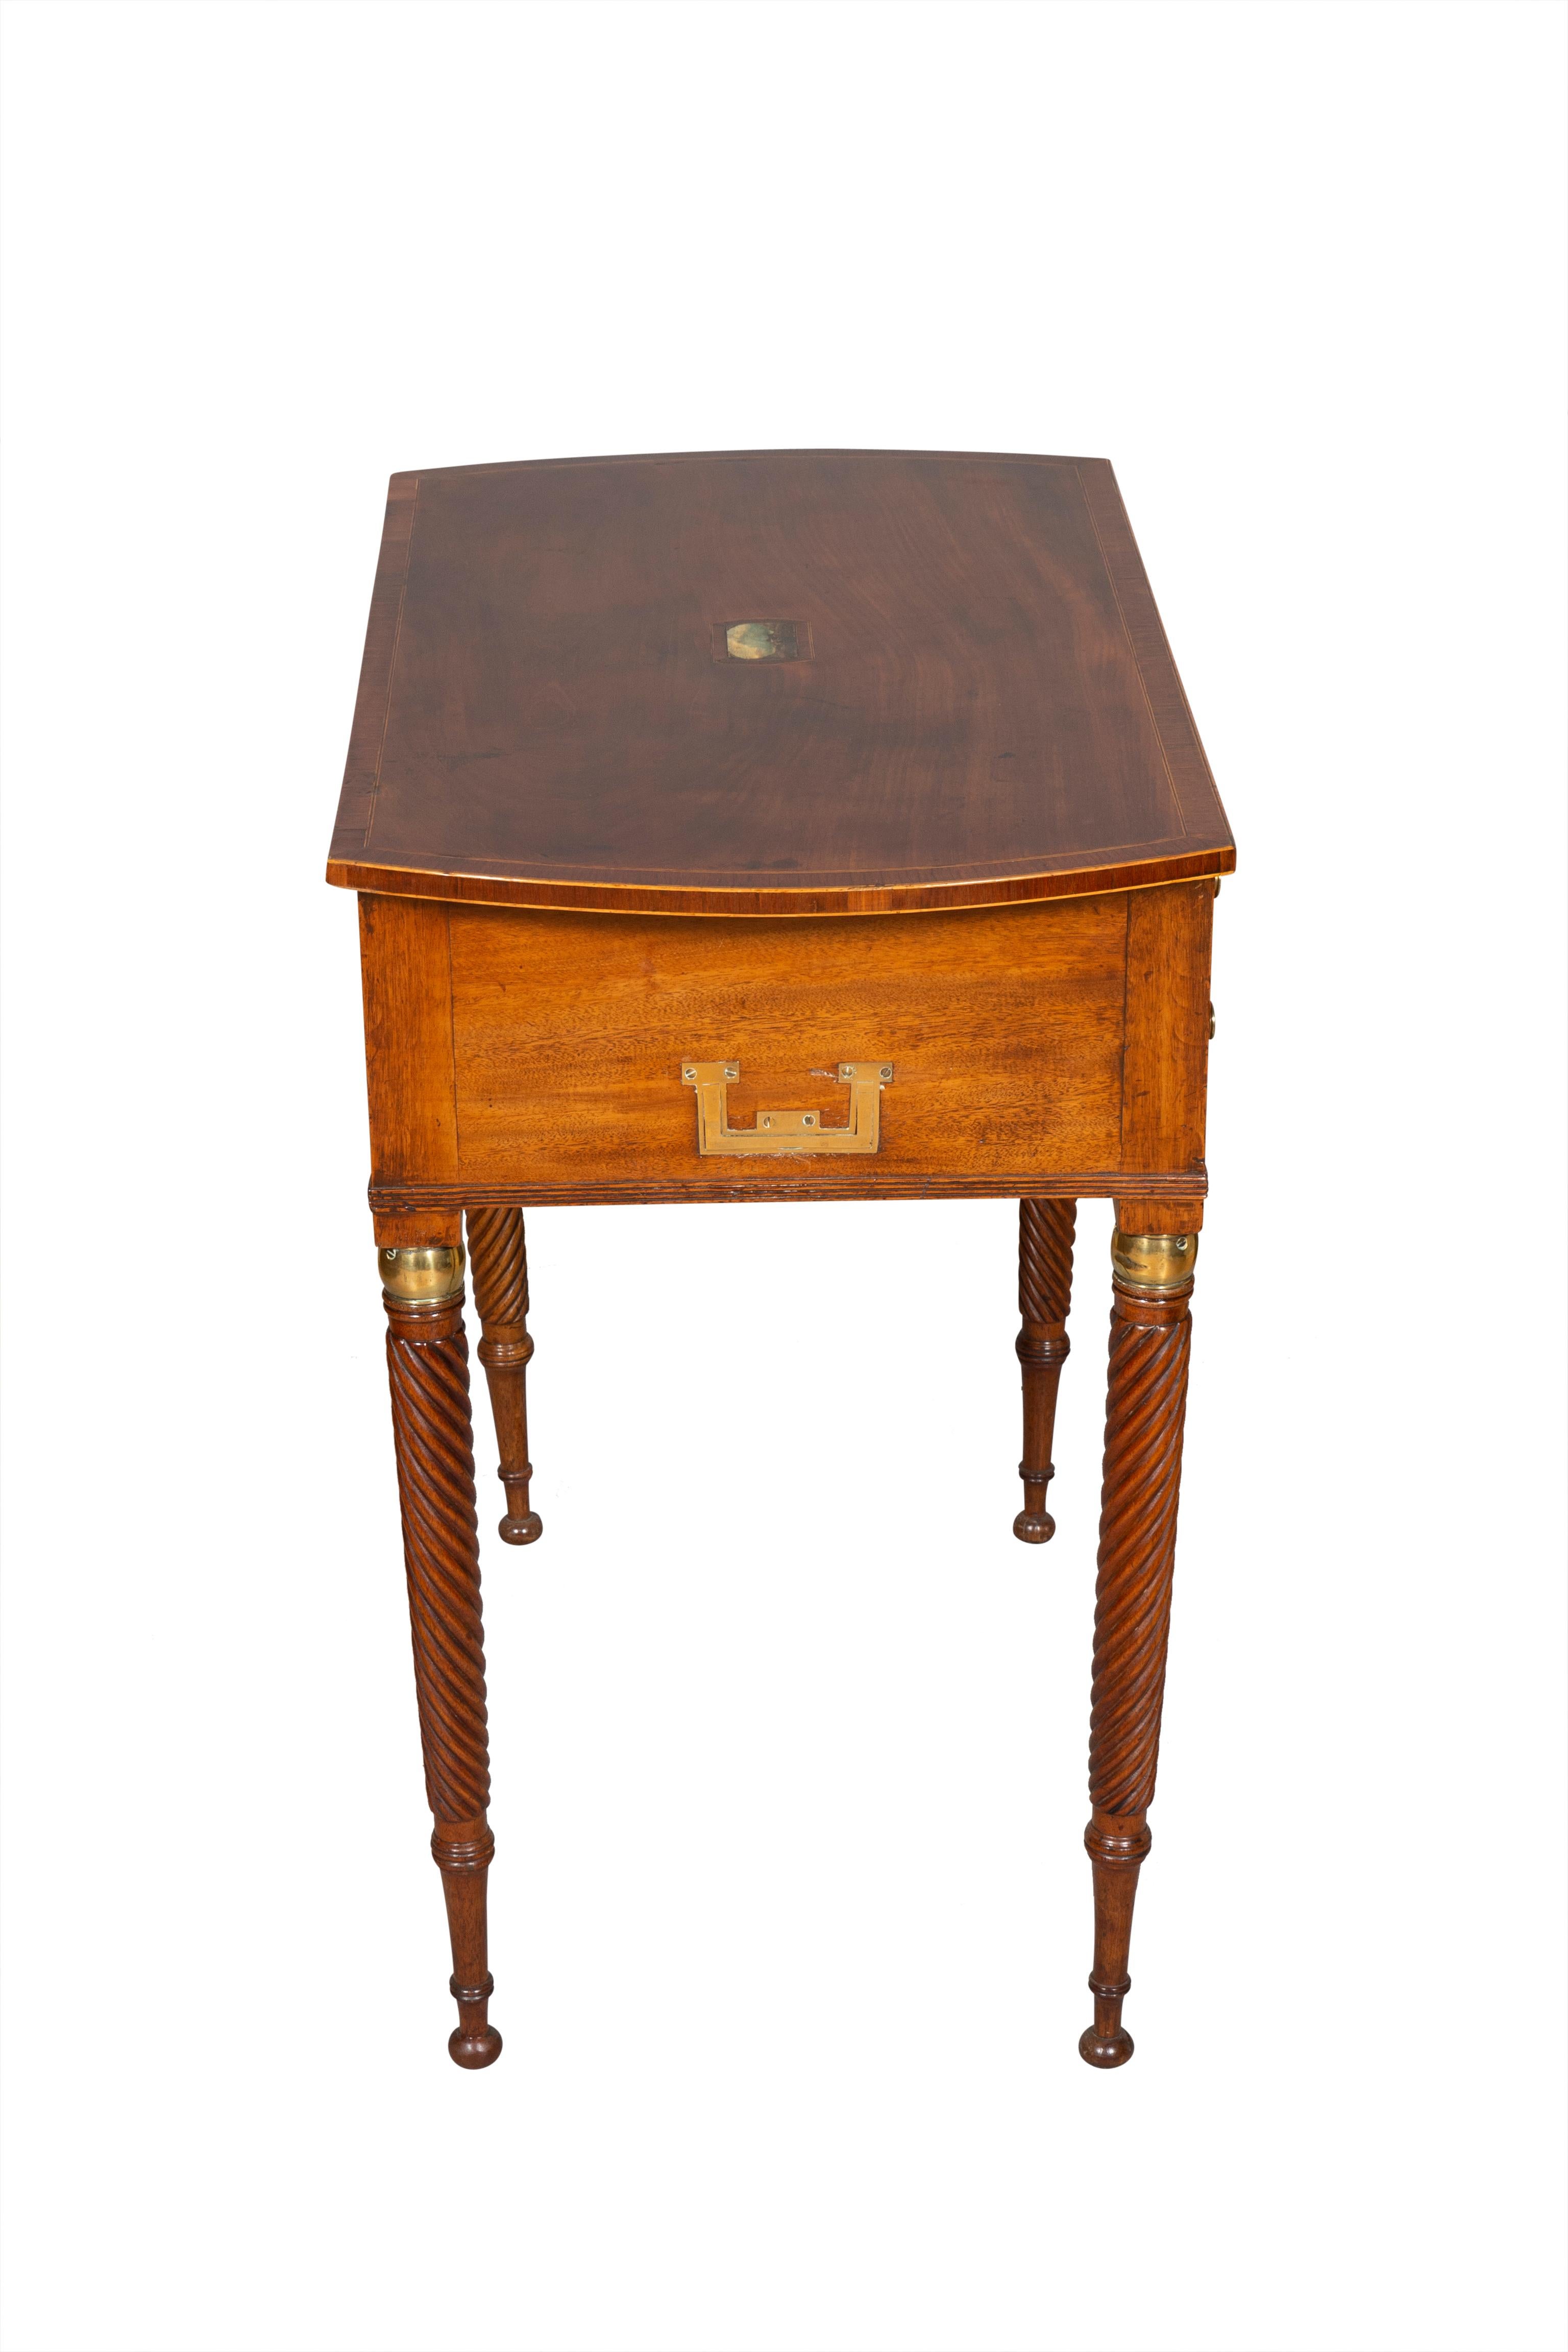 Unusual Regency Mahogany Campaign Desk In Good Condition For Sale In Essex, MA